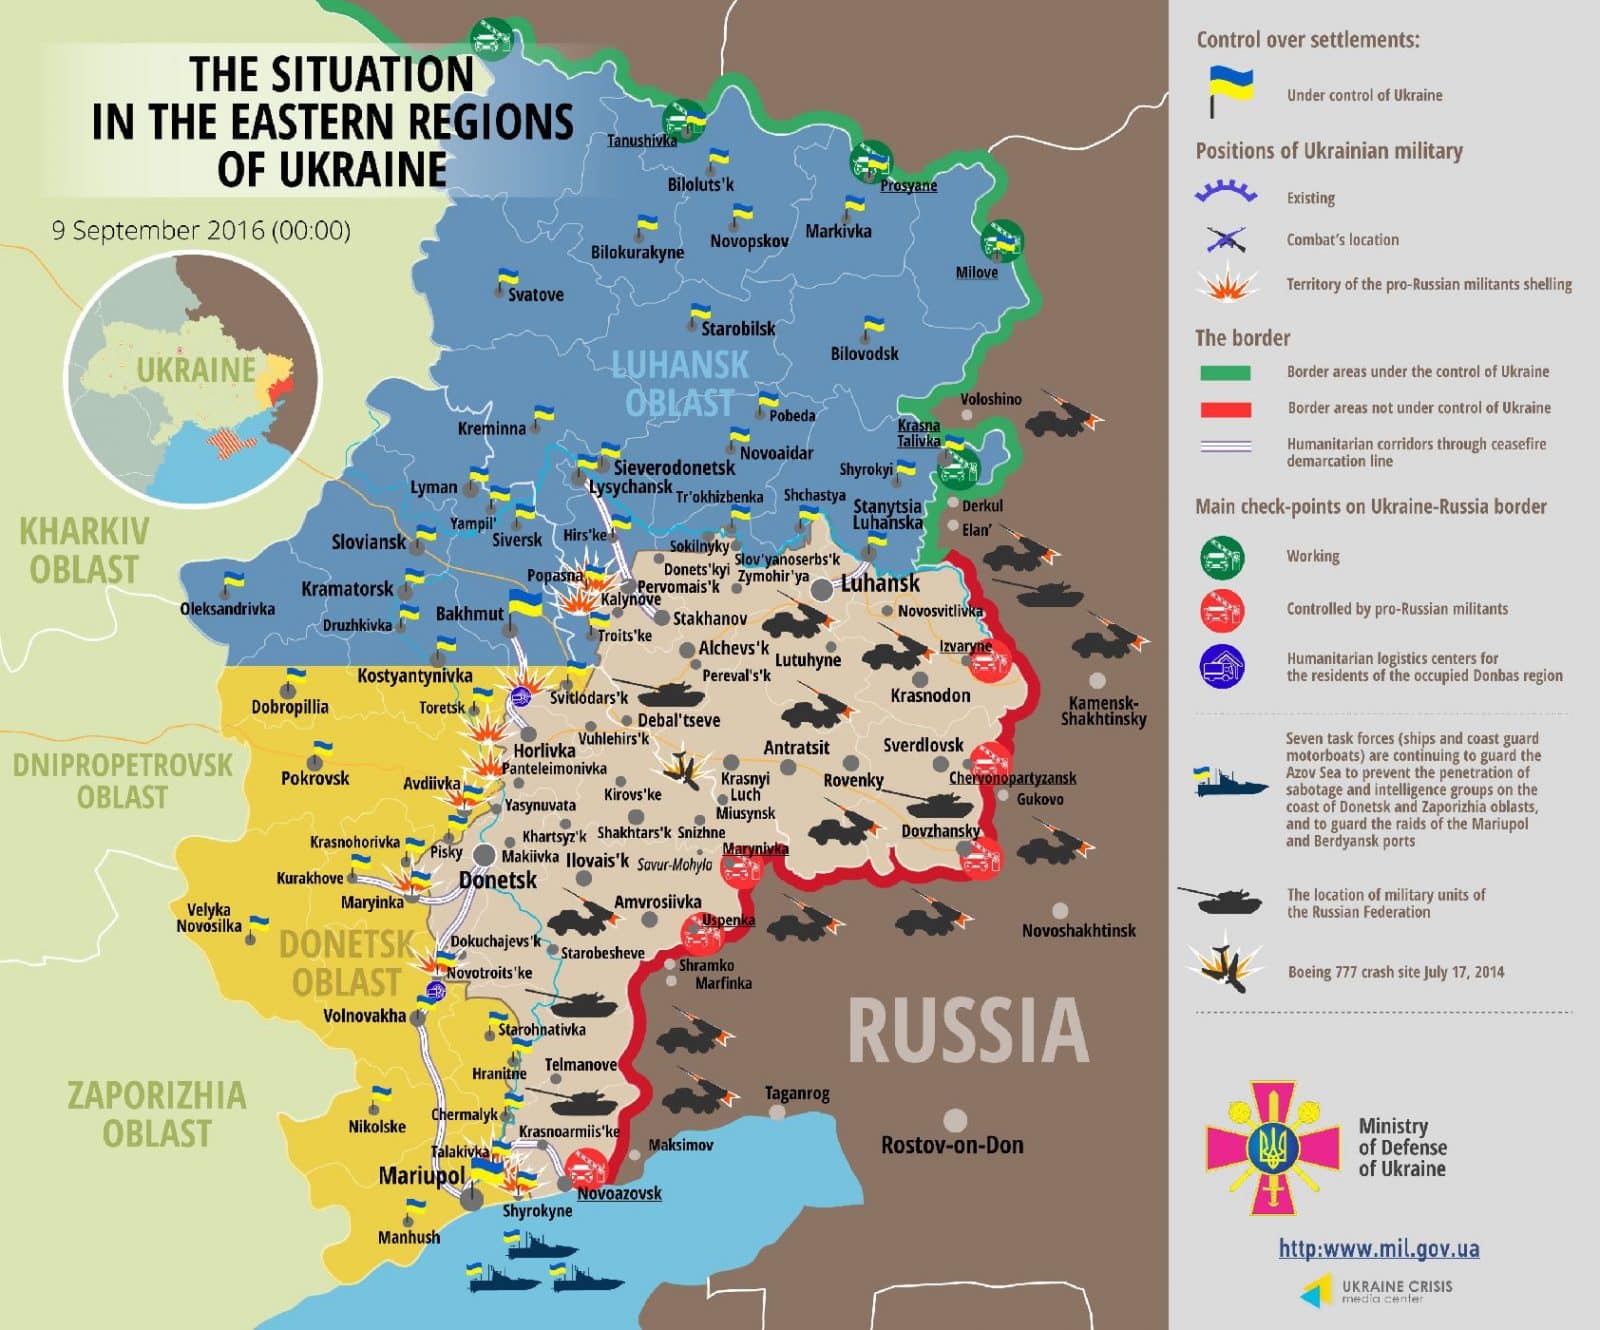 ”Silence mode in Donbas”:  Russian troops fire 120mm mortars, Ukraine army is restricted to open fire in response